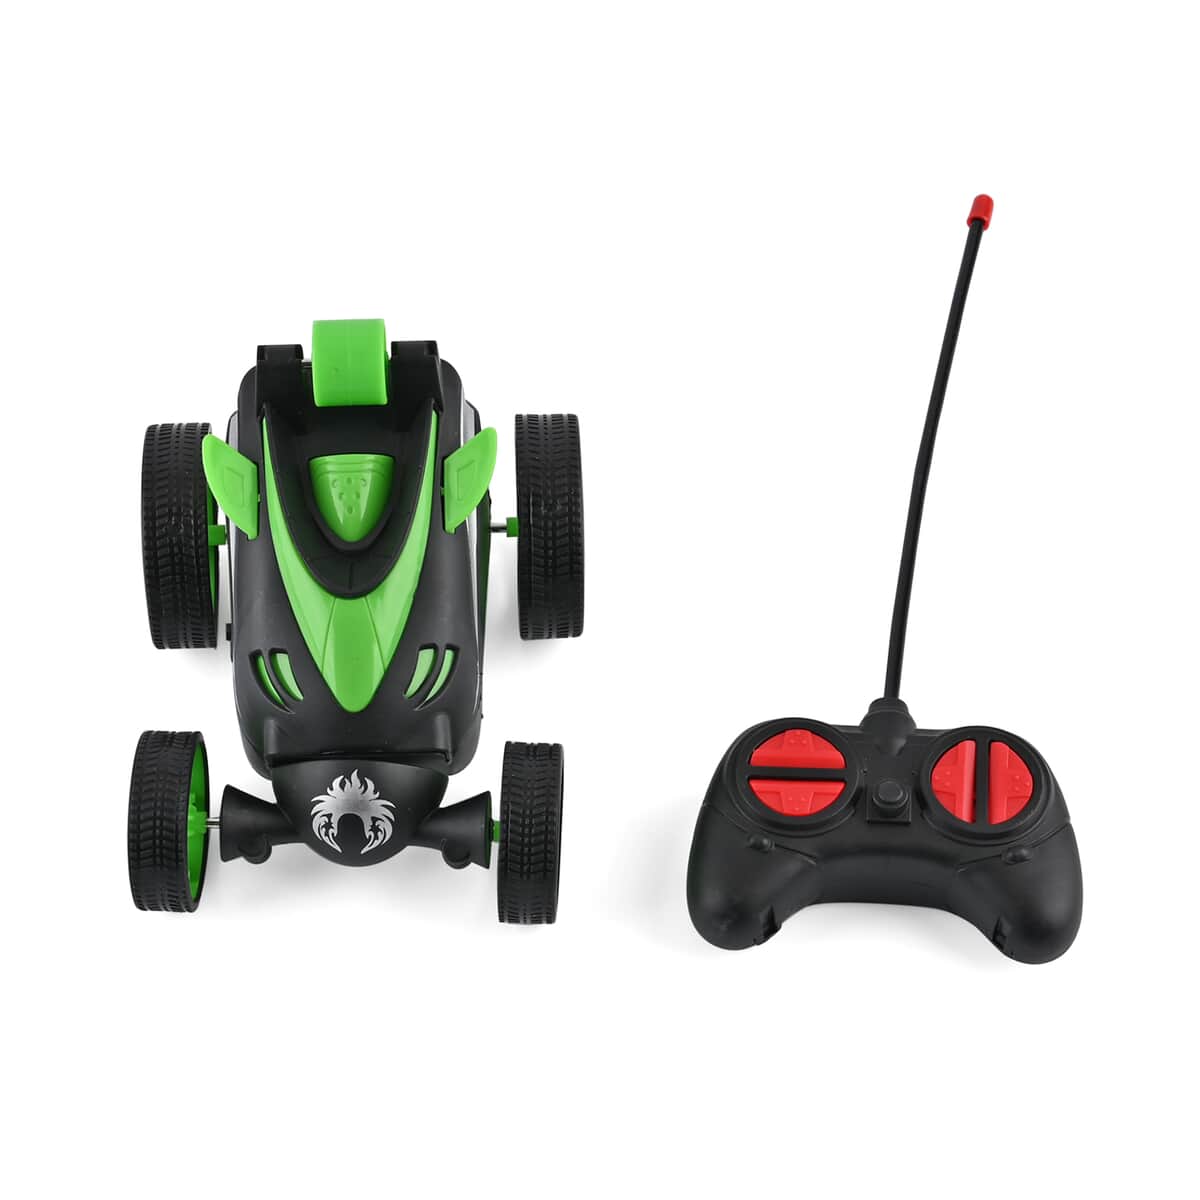 Green 4 Channels RC Stunt Car with Lights and Remote Control, Kids Stunt Car Toy For Birthday Gift (3xAAA Not Included) image number 0